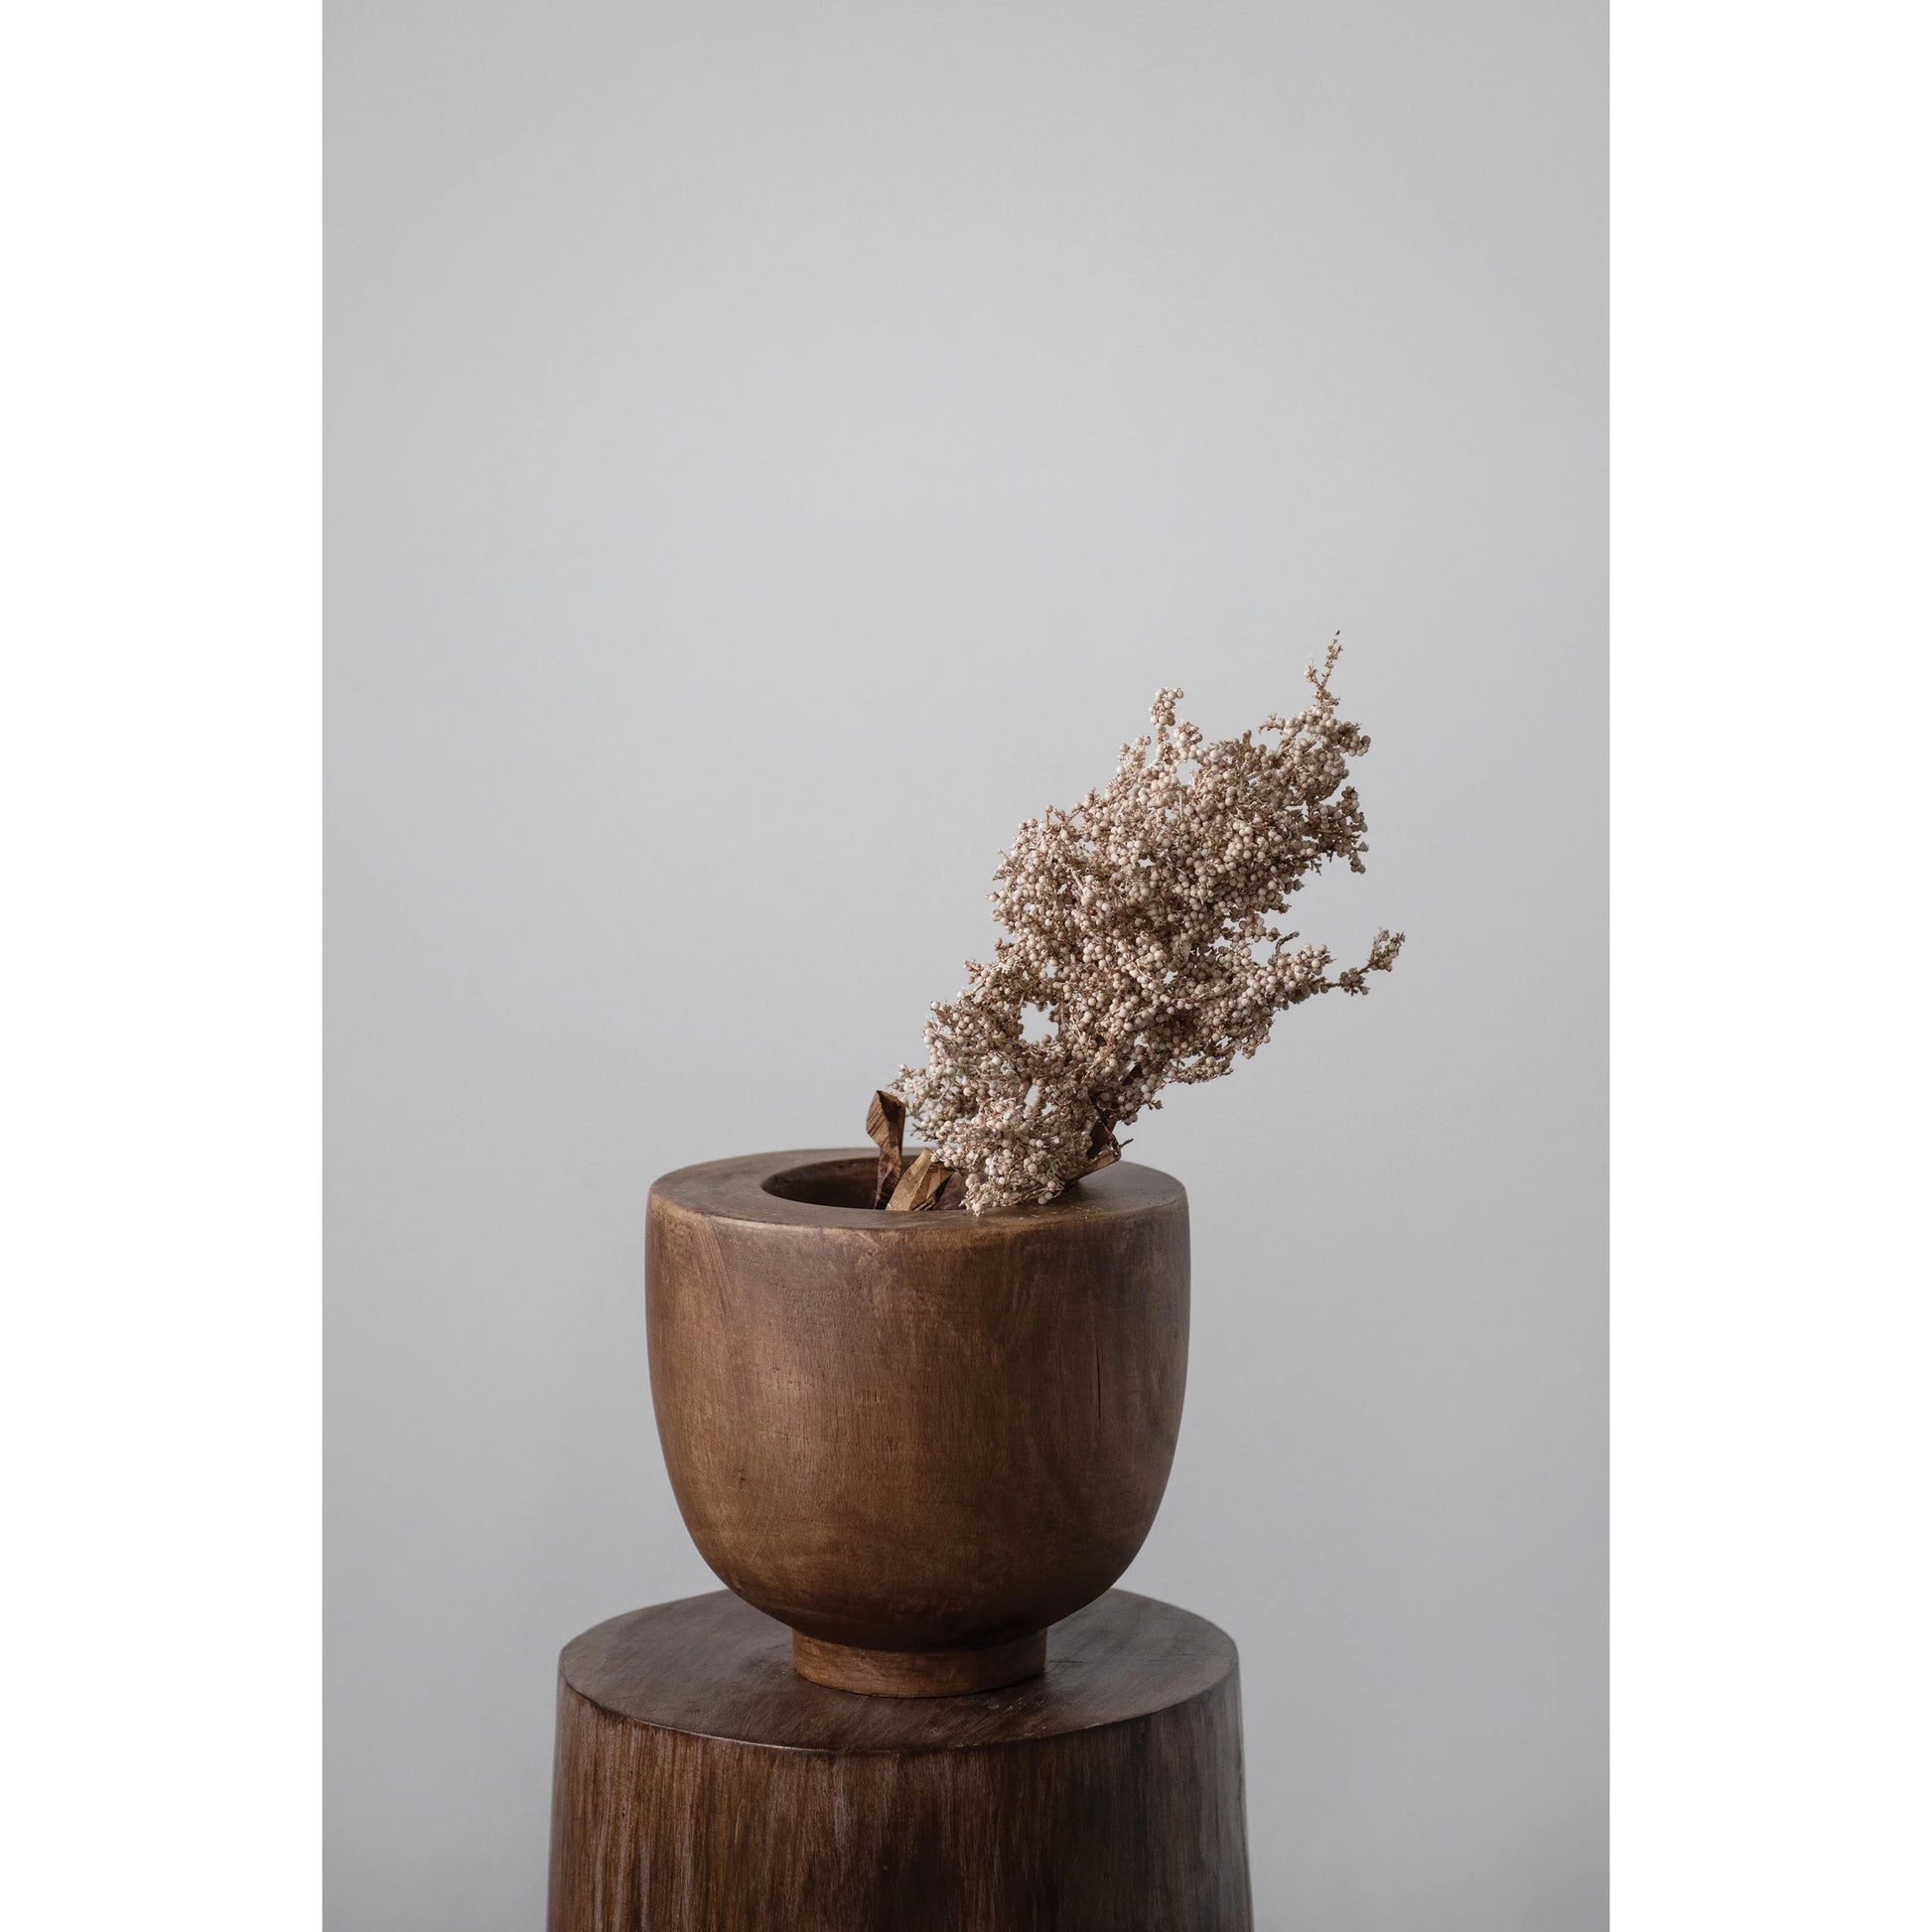 wood bowl filled with dried botanicals set on a wooden table.